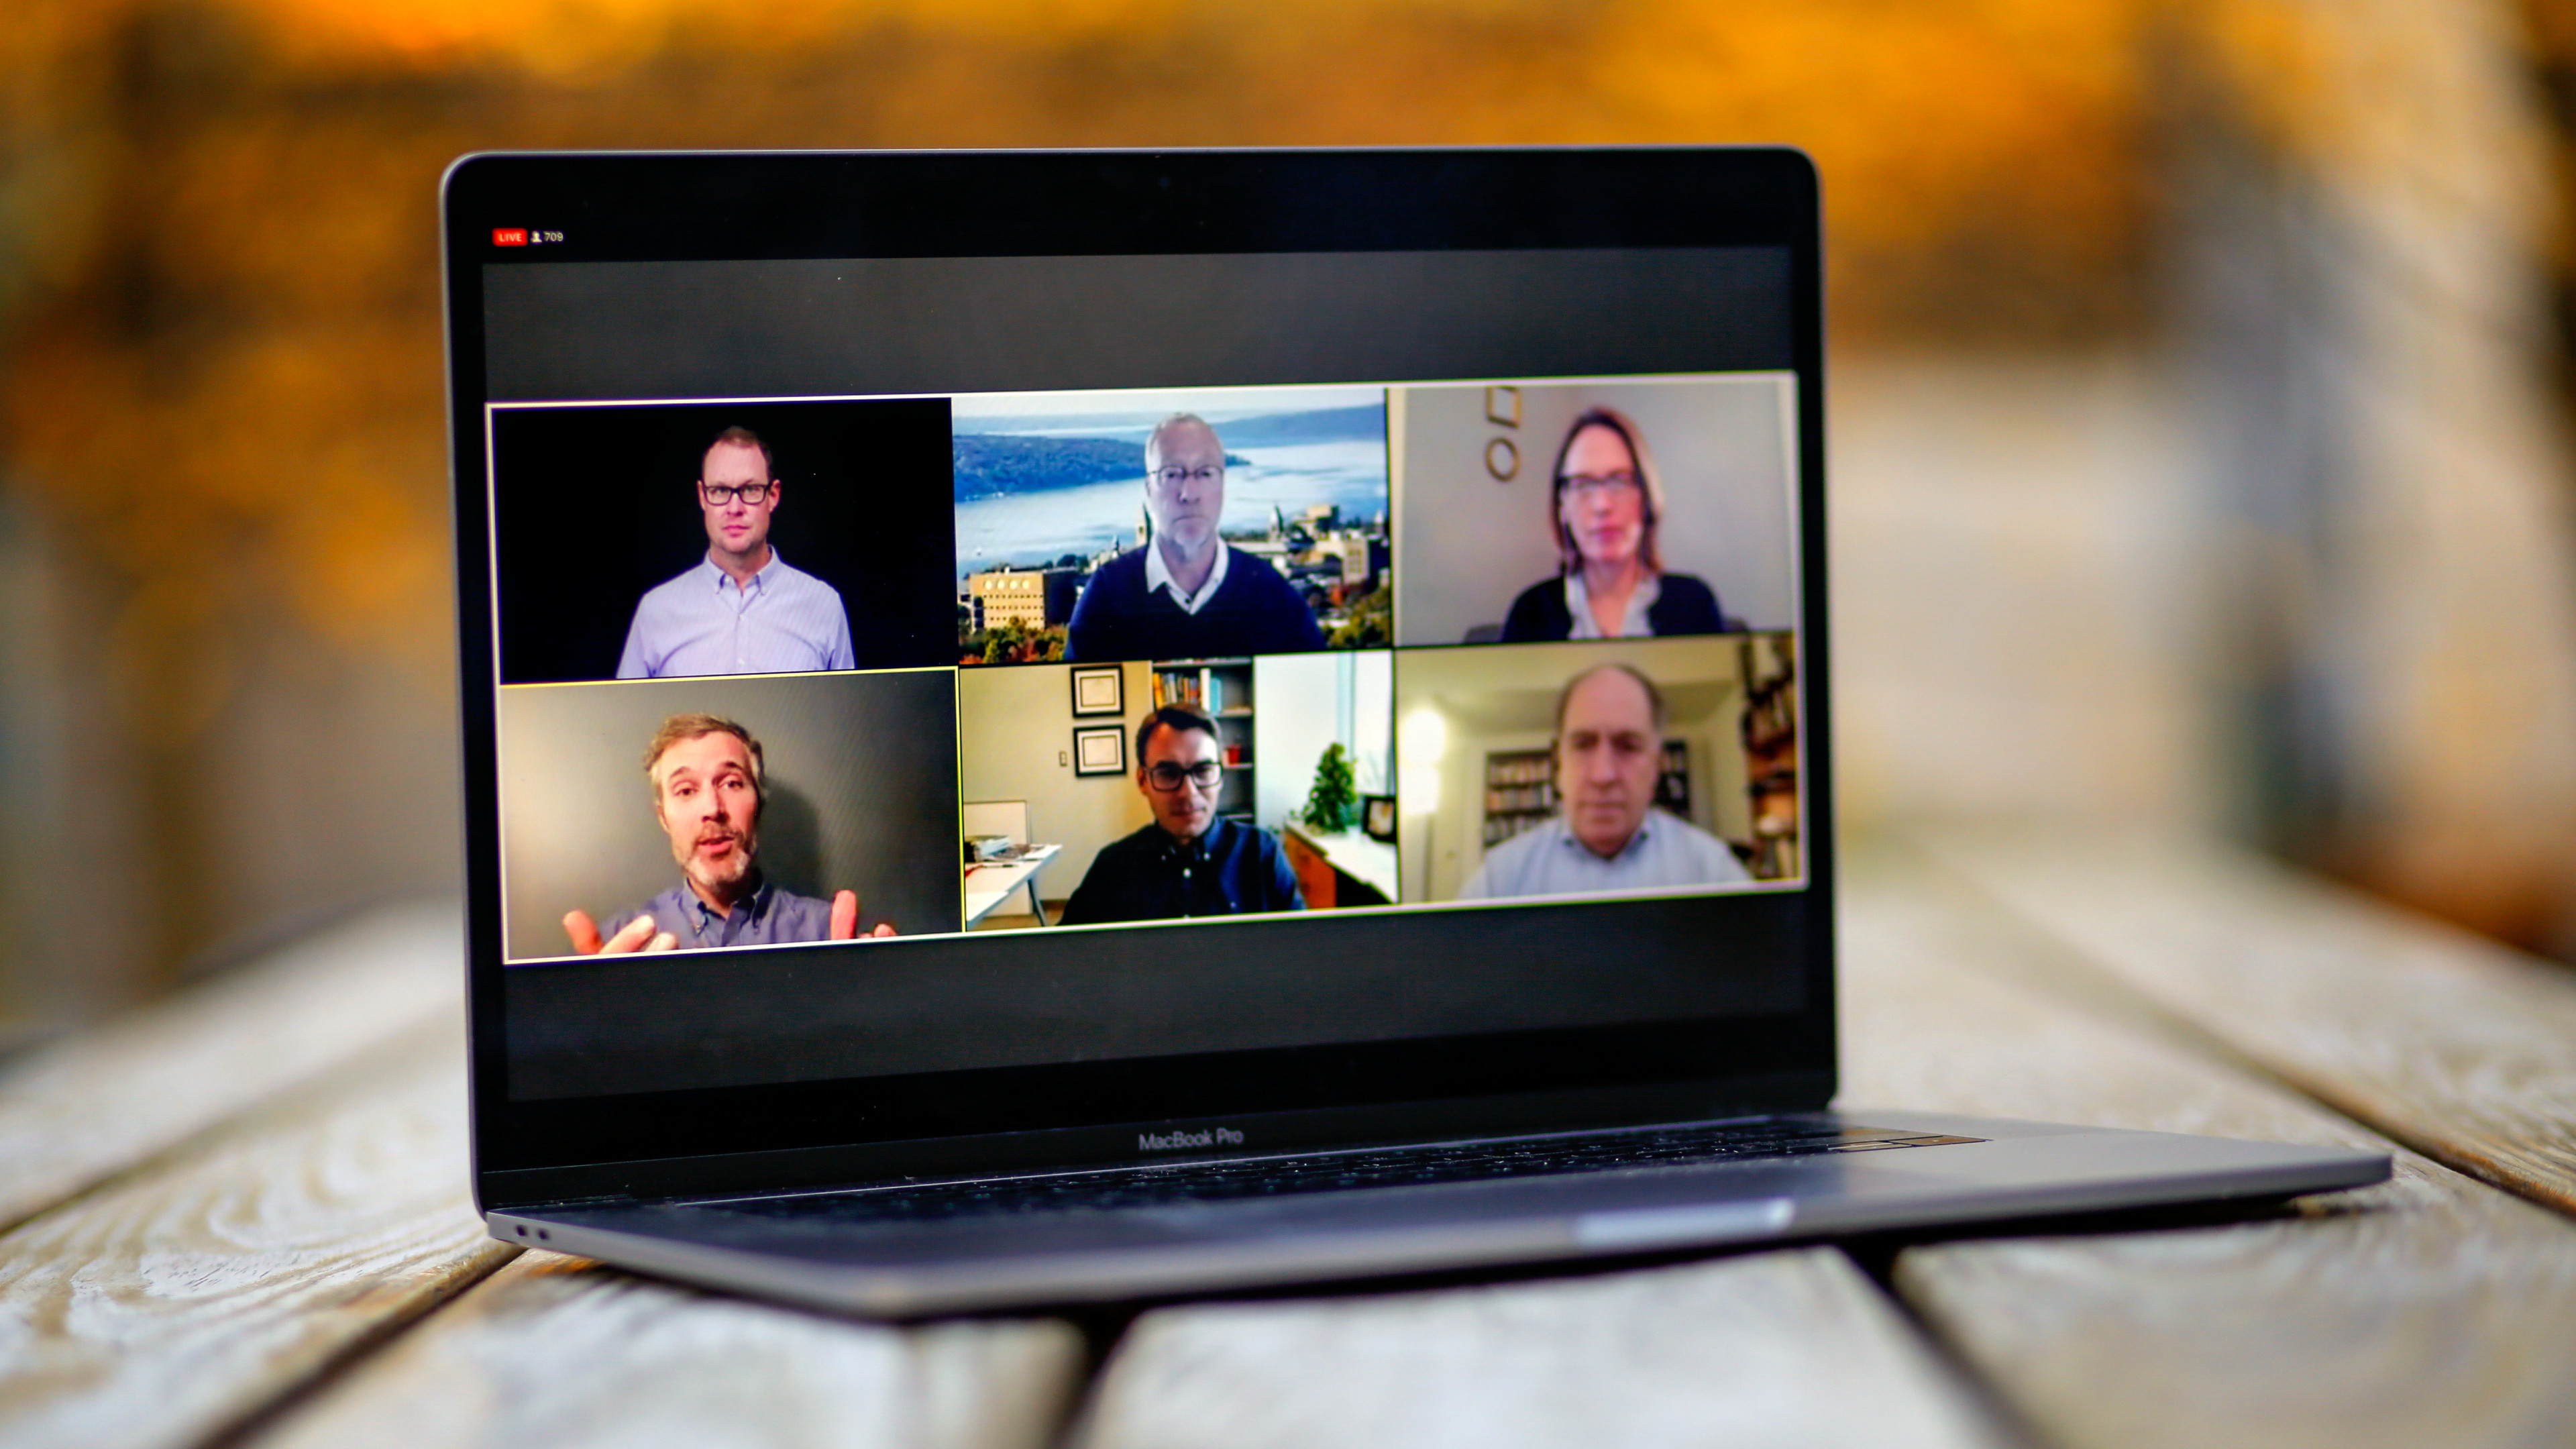 laptop showing a video call with multiple people